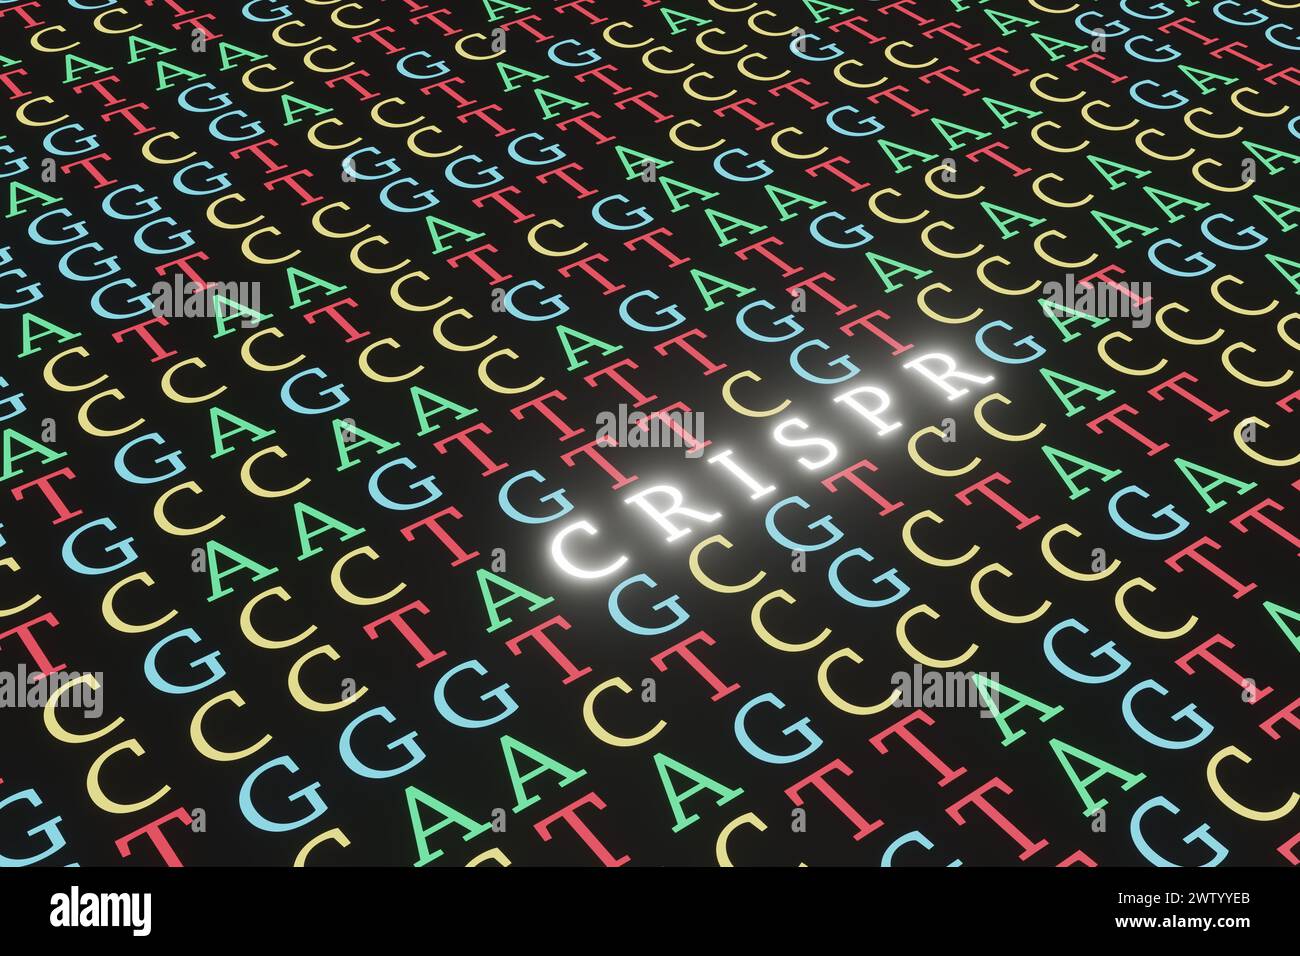 Colorful letters of ACGT fully filled the whole black screen with section changed to glowing white alphabet CRISPR. Genome editing of DNA sequence Stock Photo